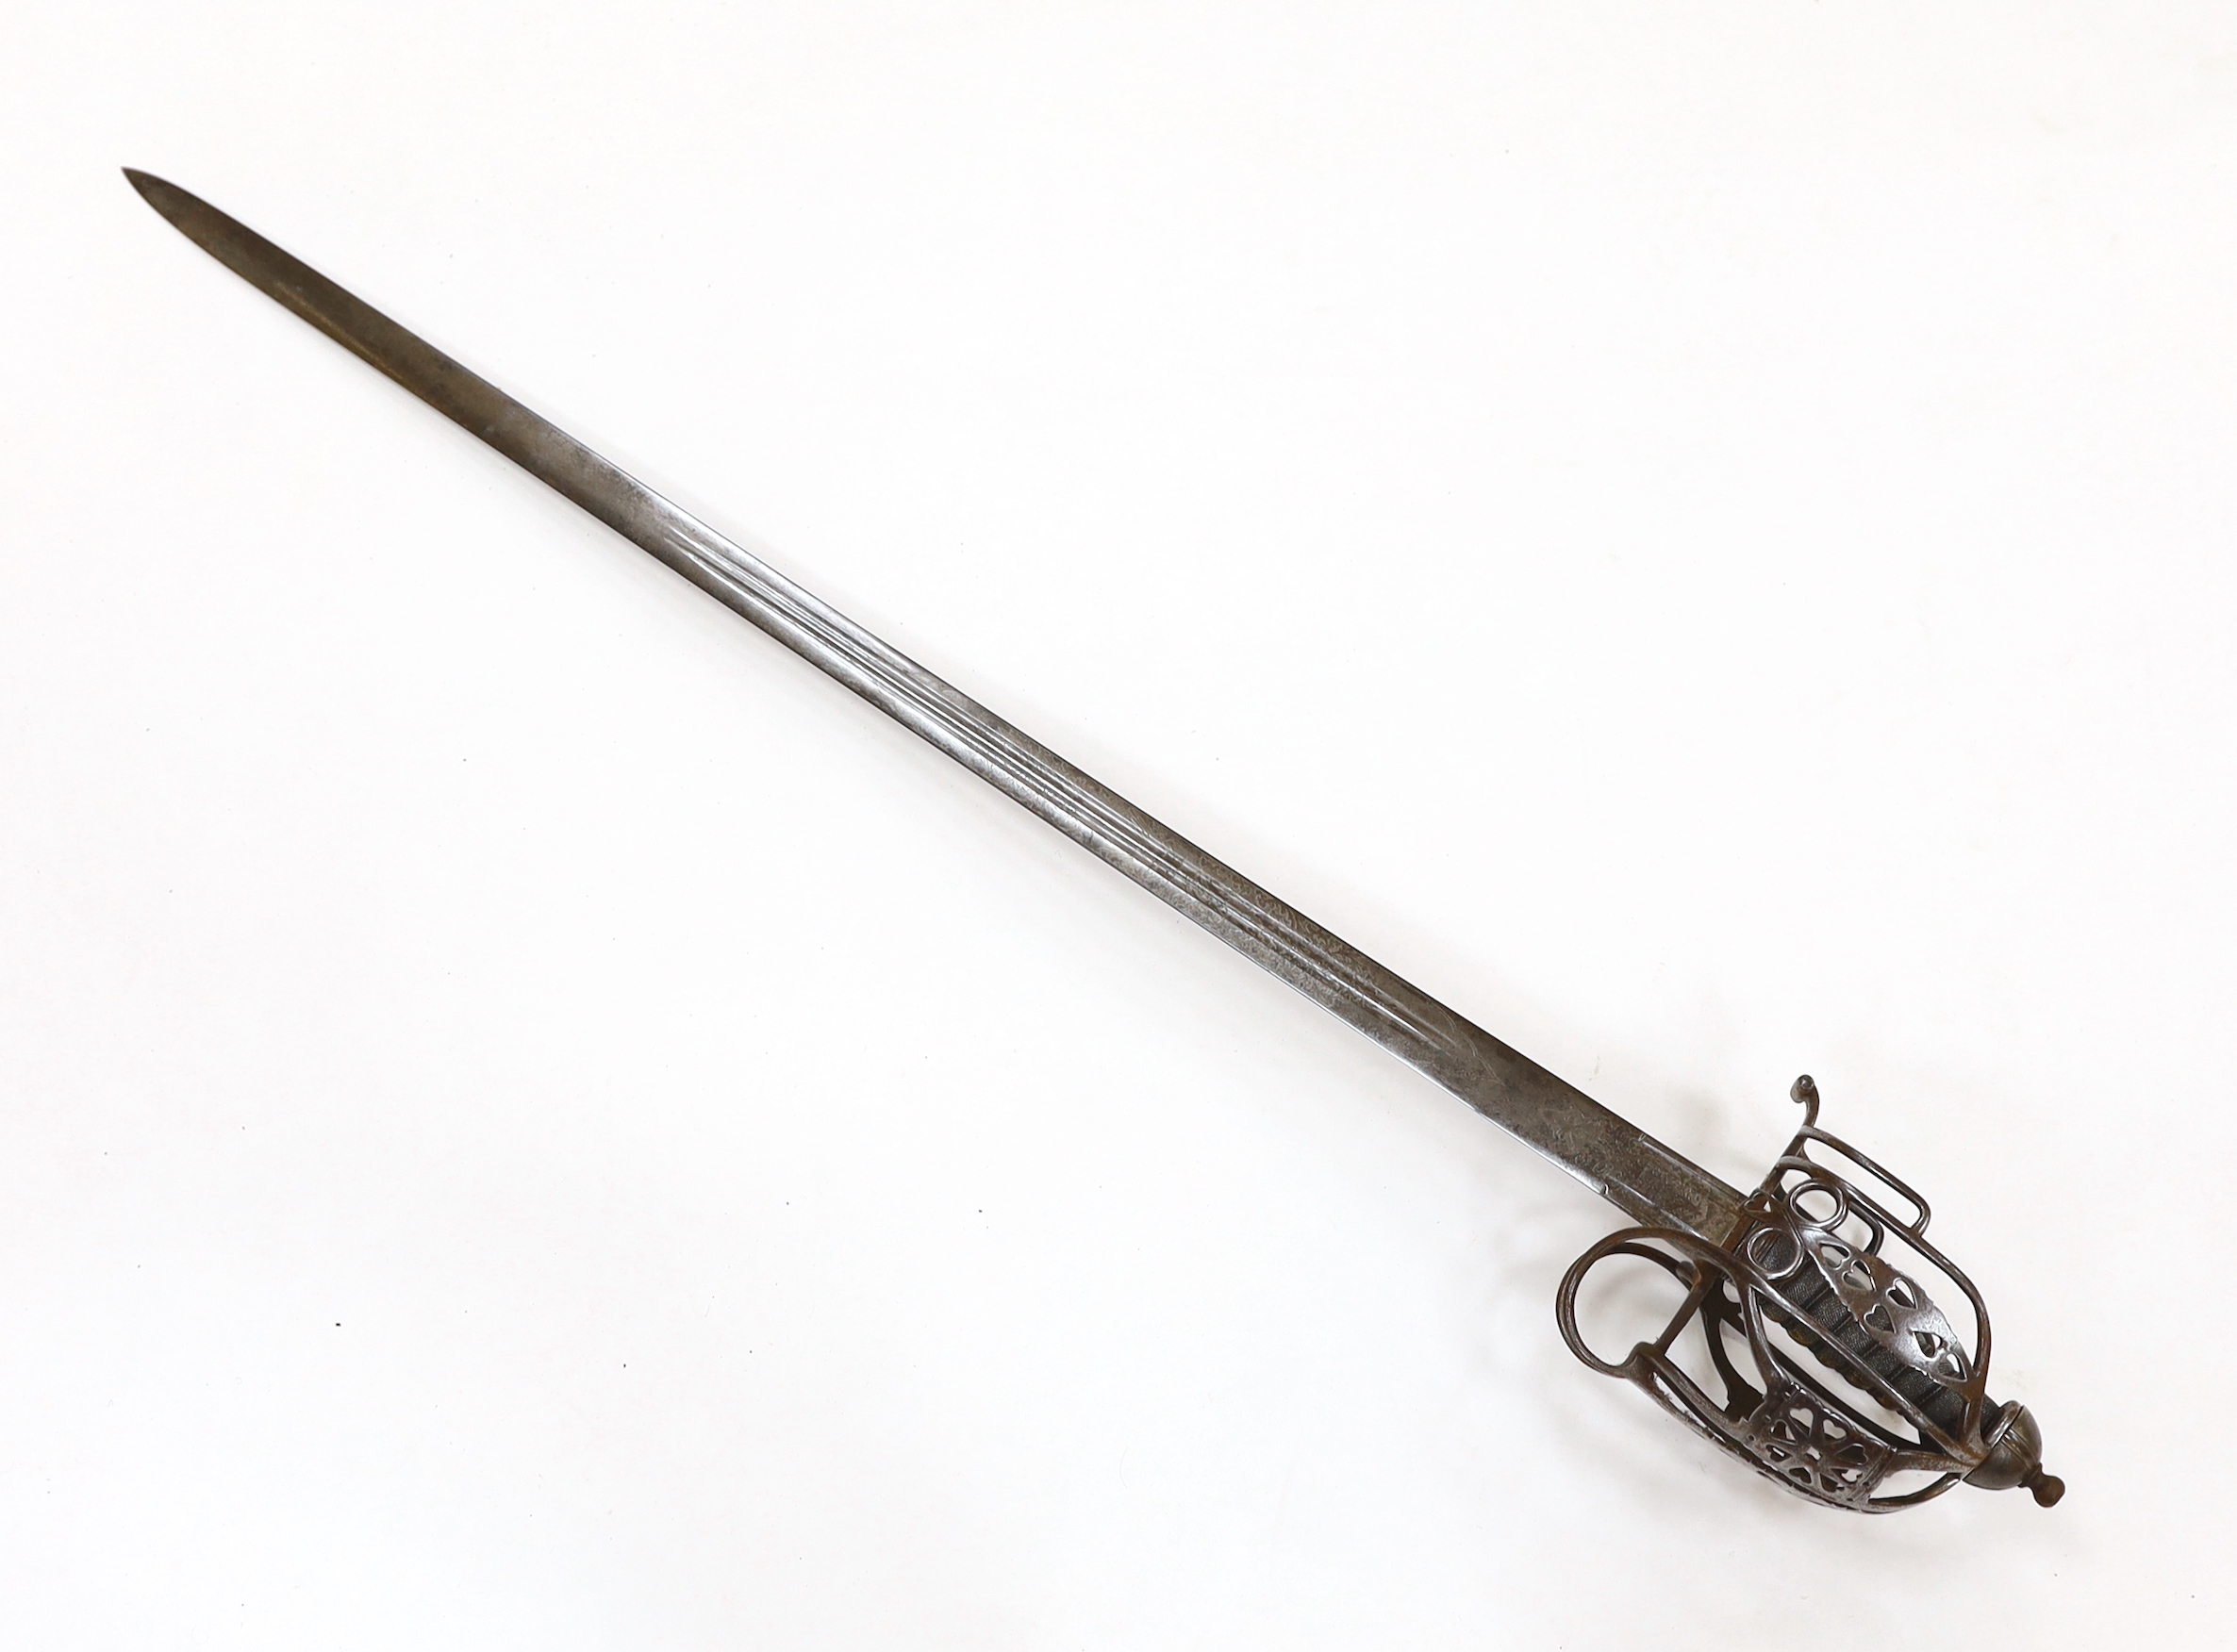 An early 19th century regulation Scottish infantry officer's Wilkinson’s broadsword of the 74th Regiment, with steel basket and pommel, double fullered blade engraved with VR cypher and the motto ‘Nemo me impune lacessit